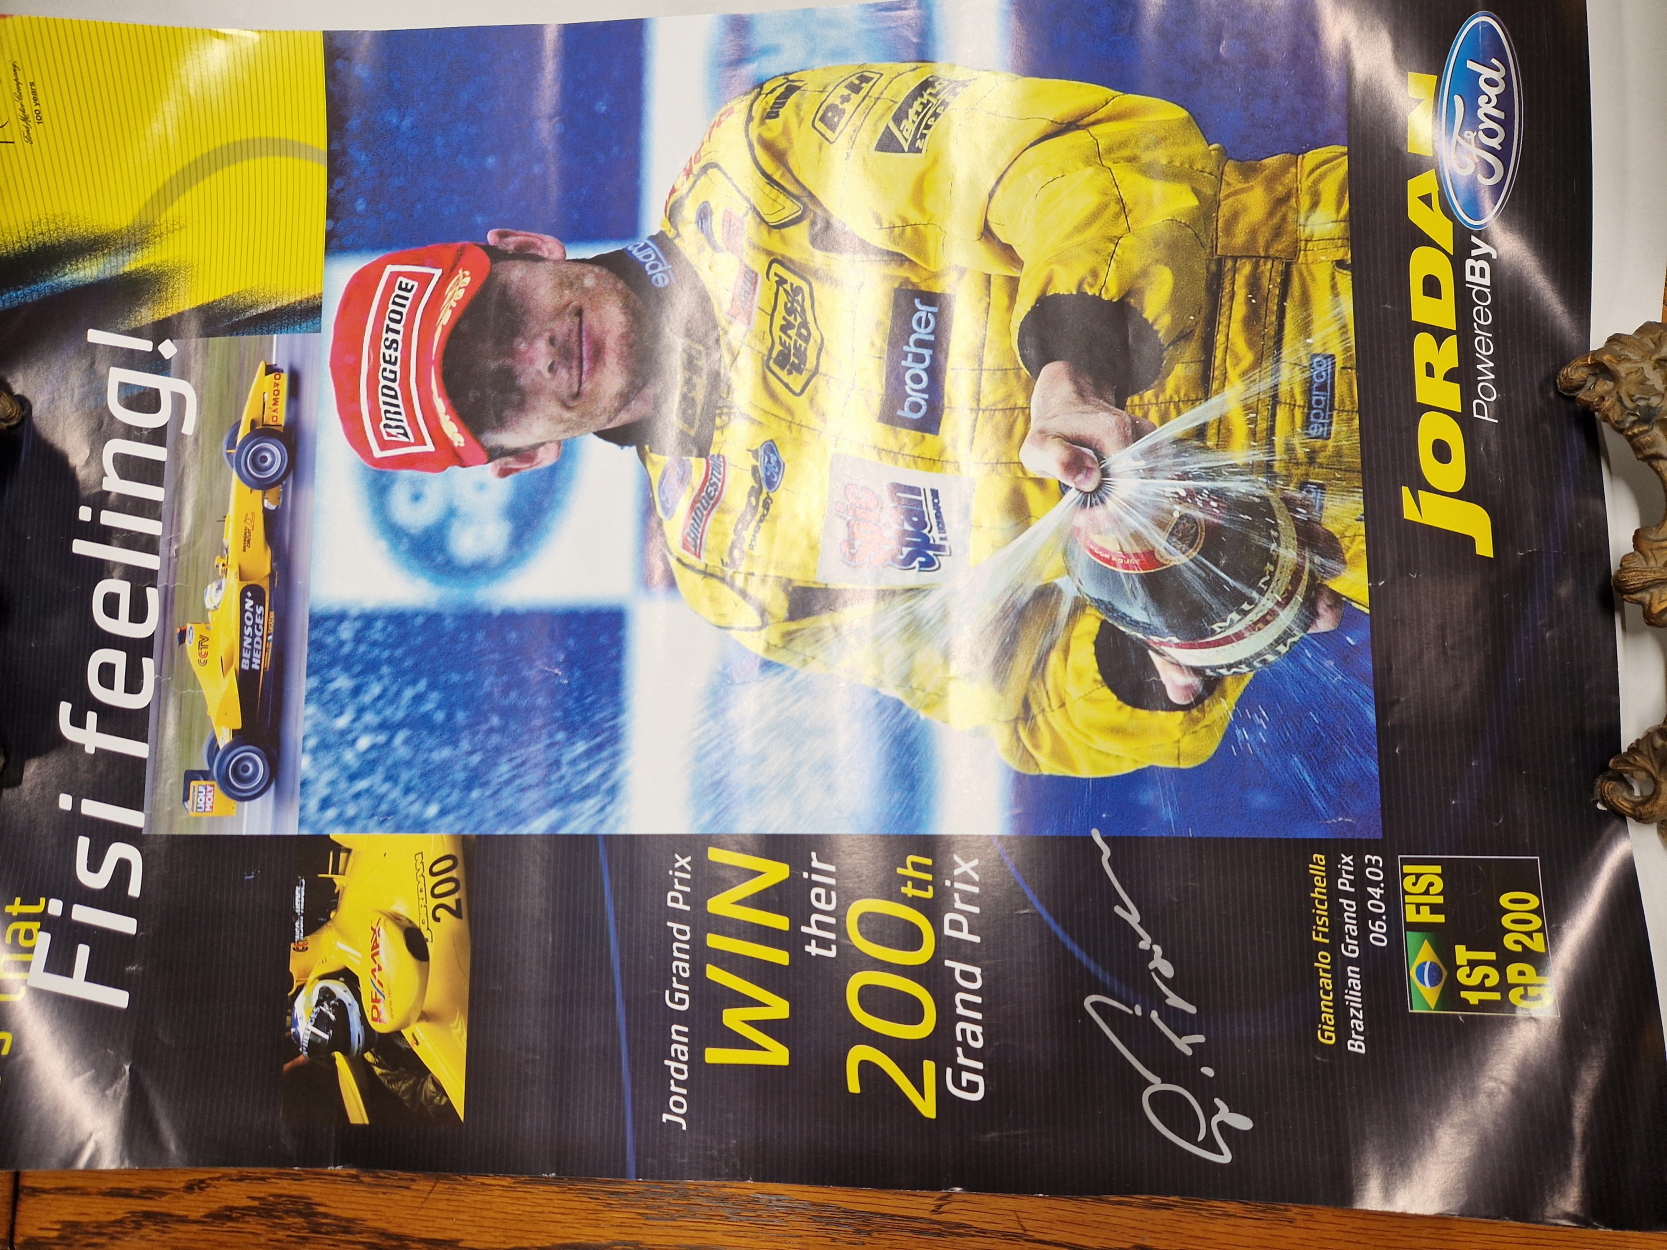 JORDAN FORMULA 1 RACING SIGNED GIANCARLO FISICHELLA POSTER. AND AN ANDREW KITSON SIGNED PRINT (2) - Image 5 of 6